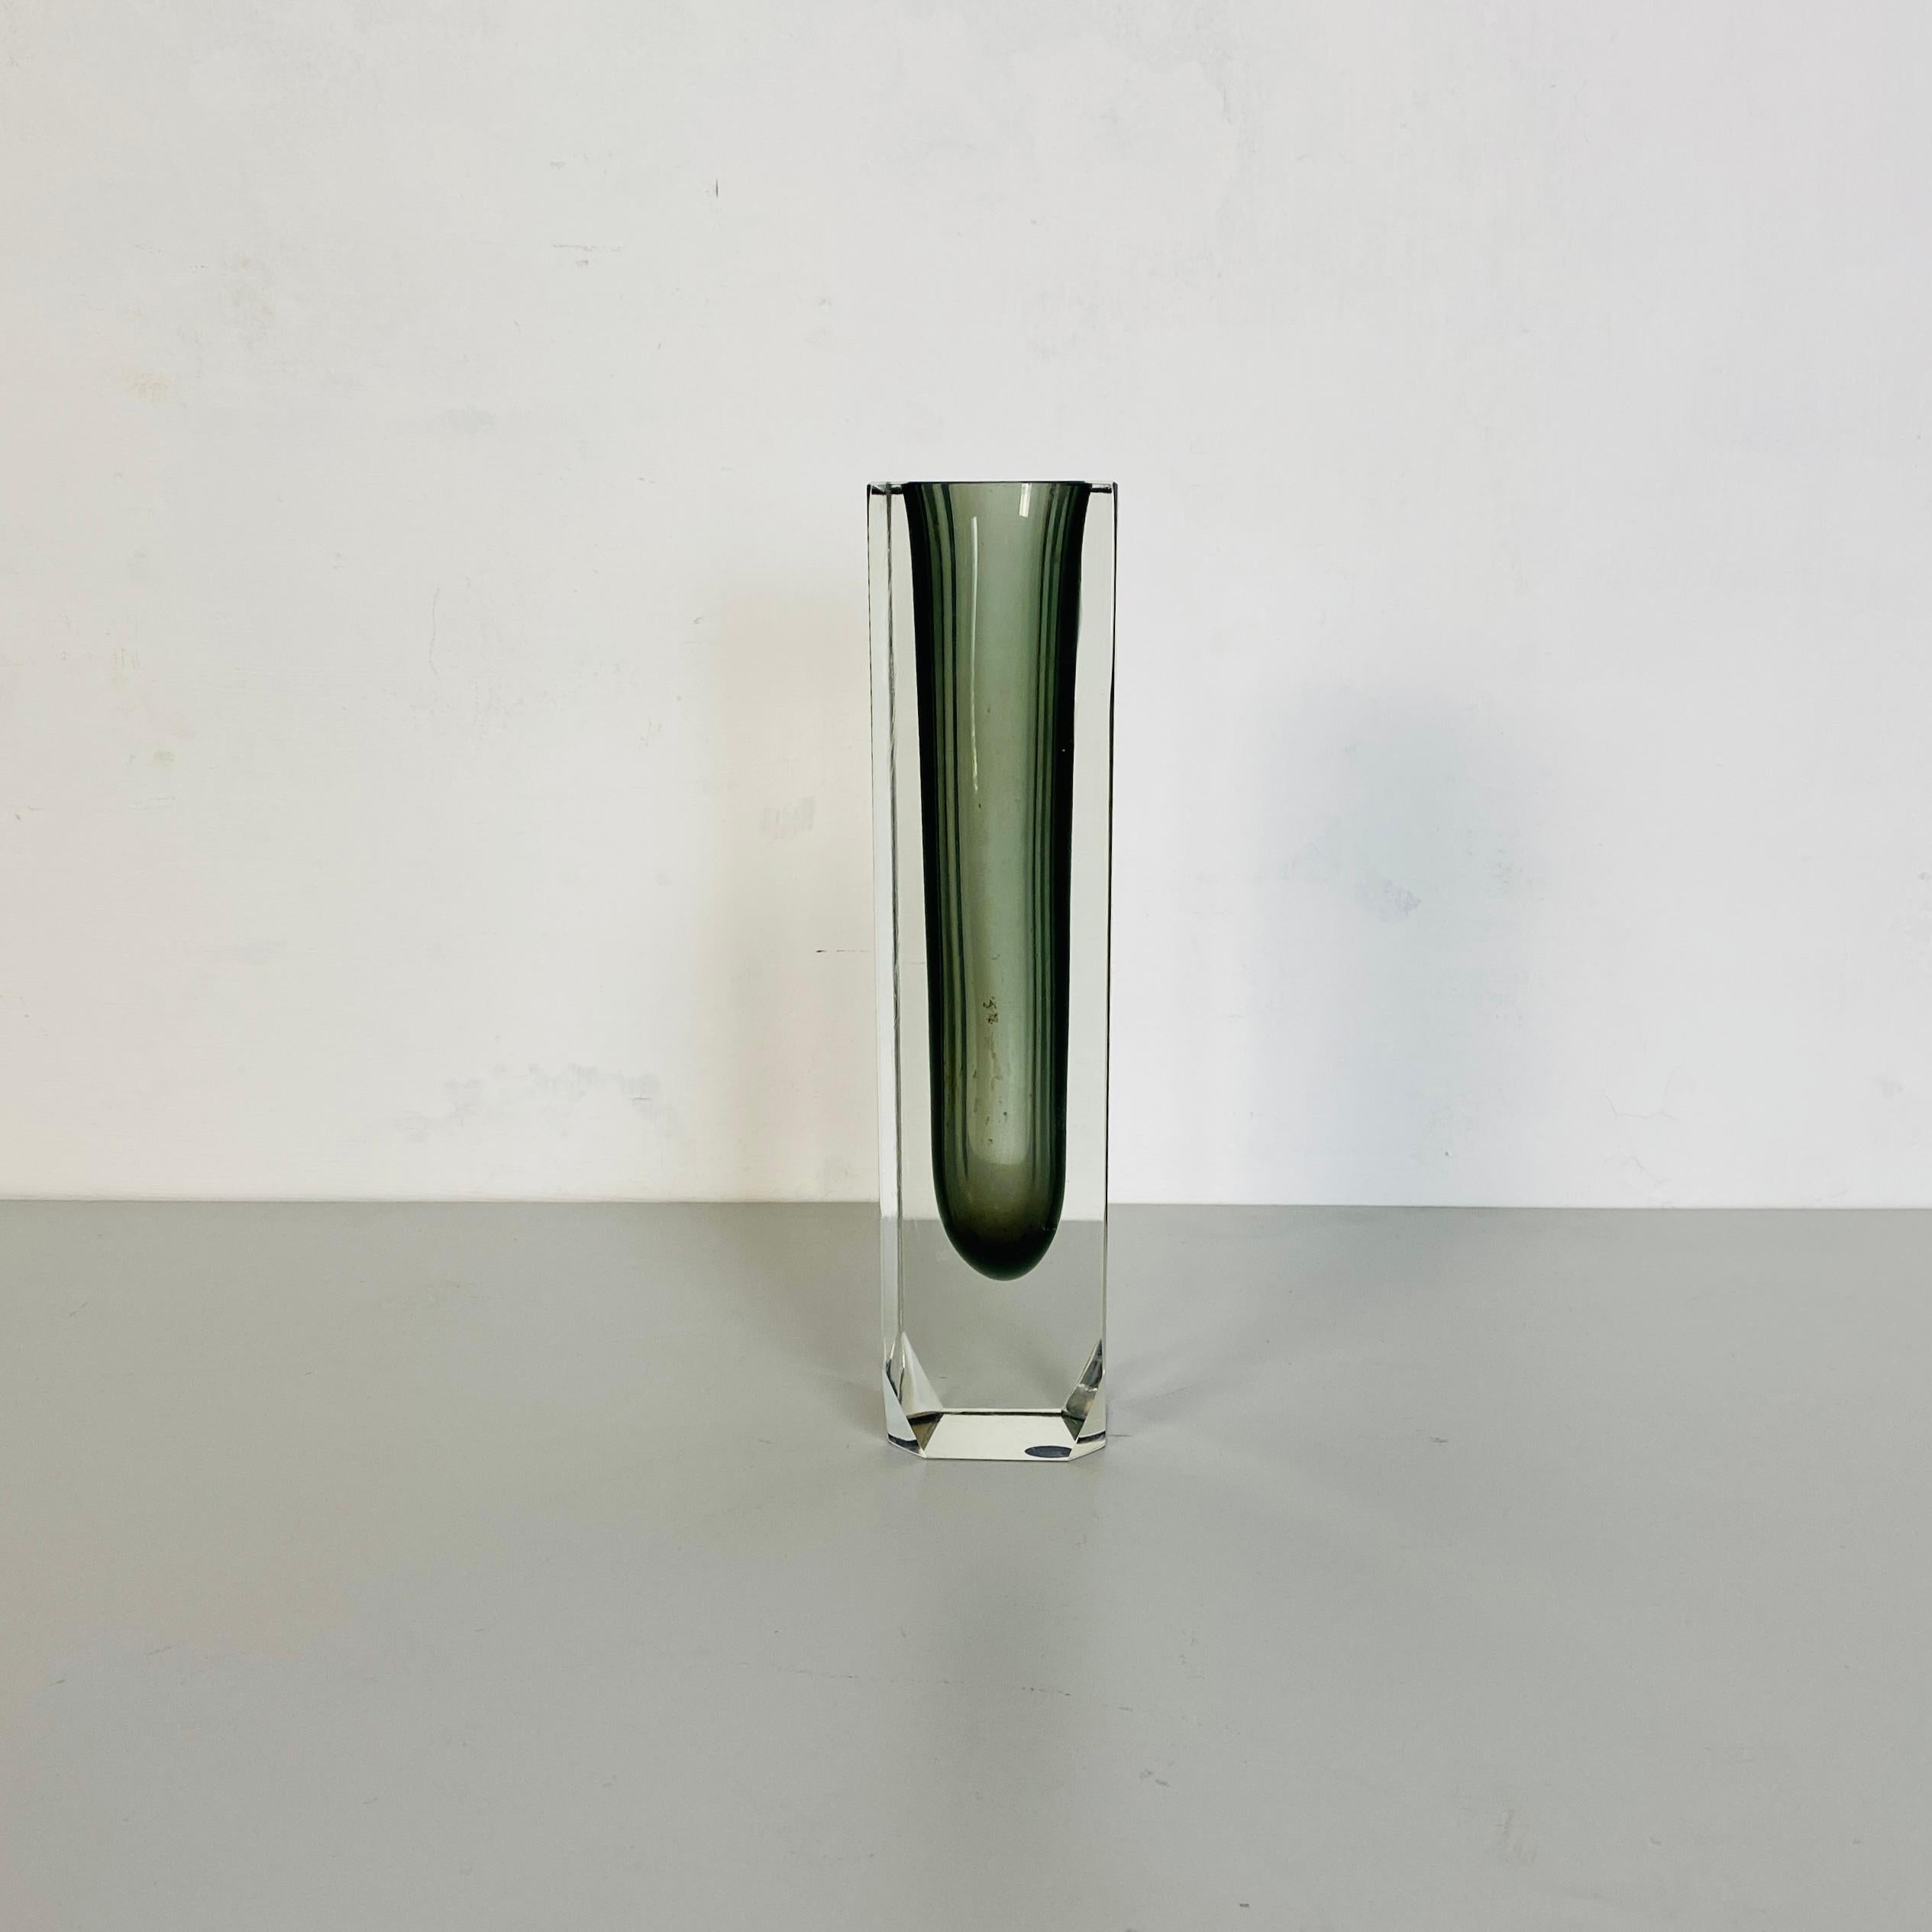 Italian Mid-Century Modern grey murano glass Sommersi series, 1960s
Gray Murano glass vase from the I Sommersi series.
This Fantastic series of Murano glass vase with various colored shades, is the i sommersi series vase realized from the 1st period